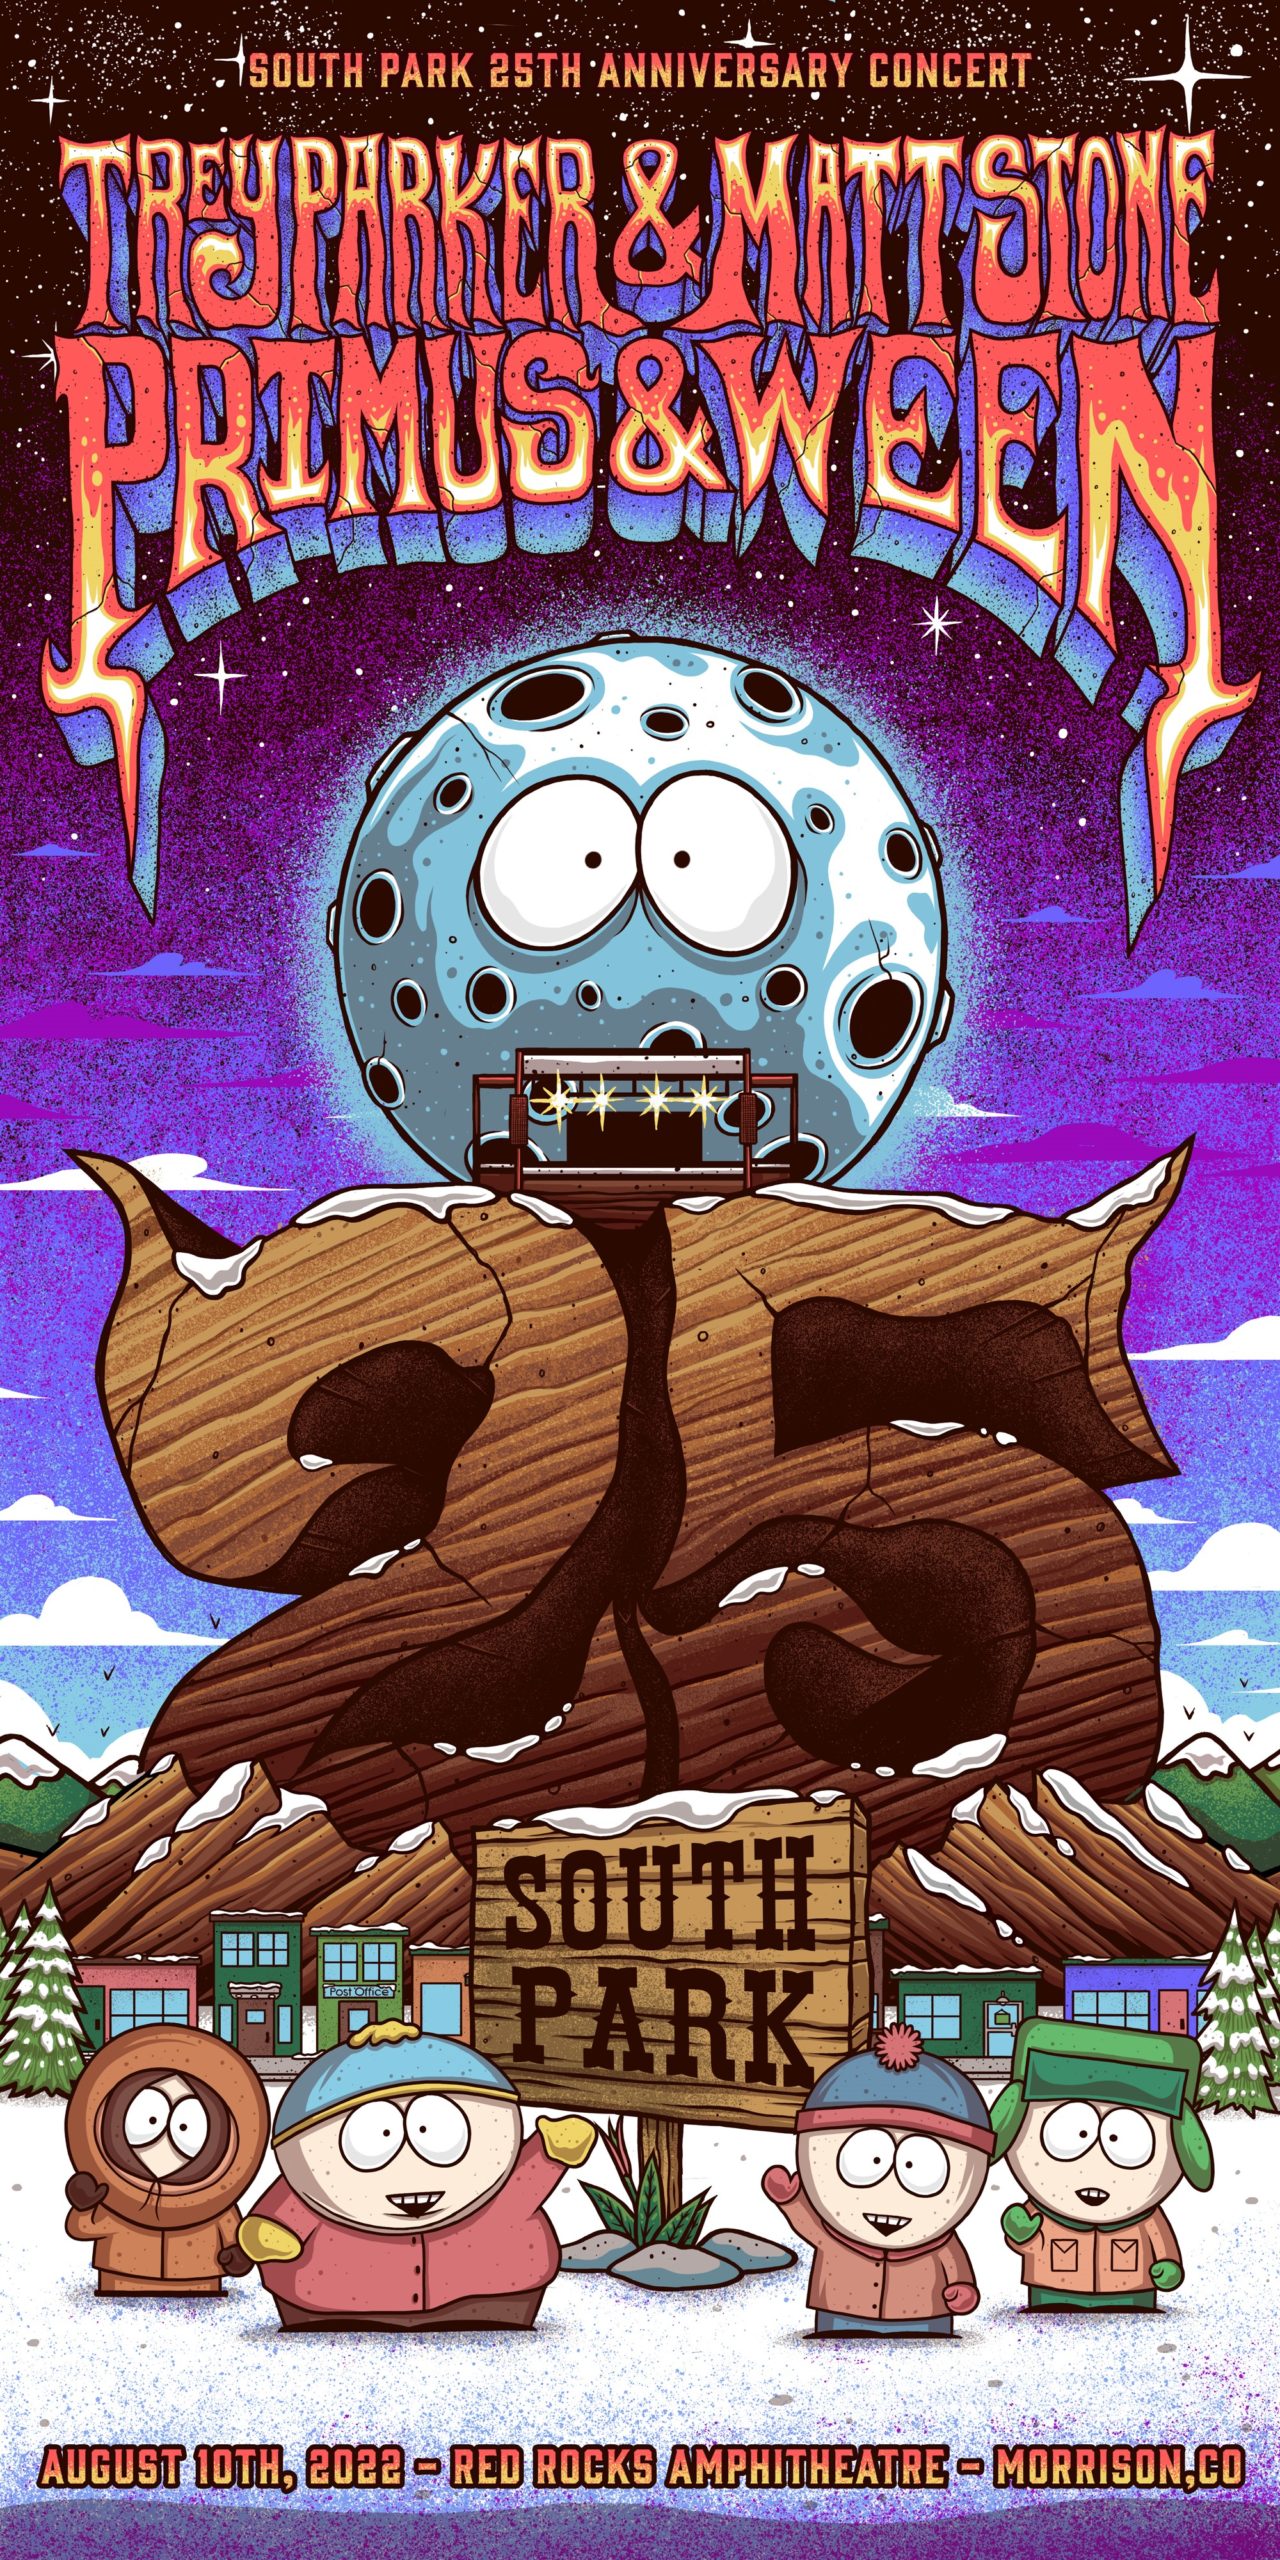 South Park 25th Anniversary Concert at Red Rocks